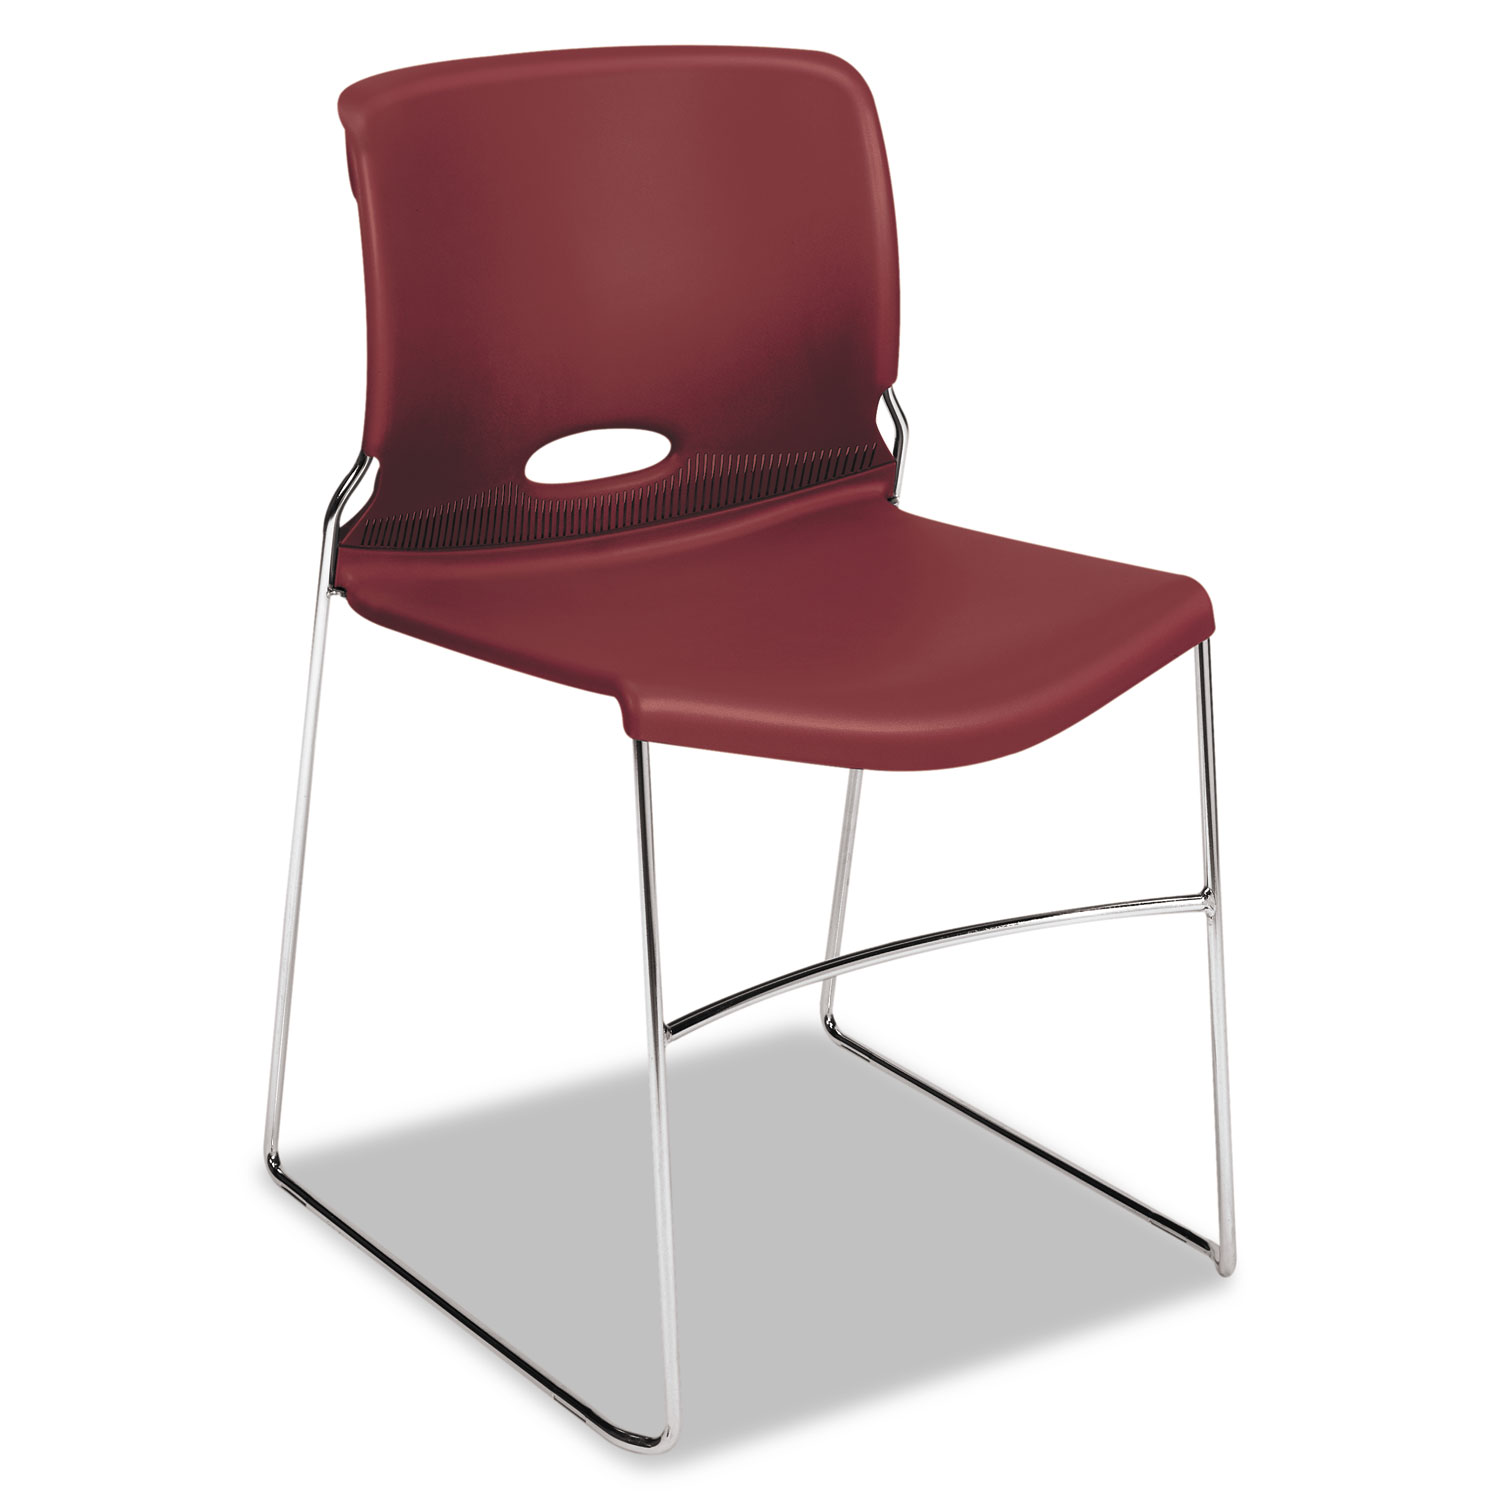  HON H4041.MB.Y Olson Stacker High Density Chair, Mulberry Seat/Mulberry Back, Chrome Base, 4/Carton (HON4041MB) 